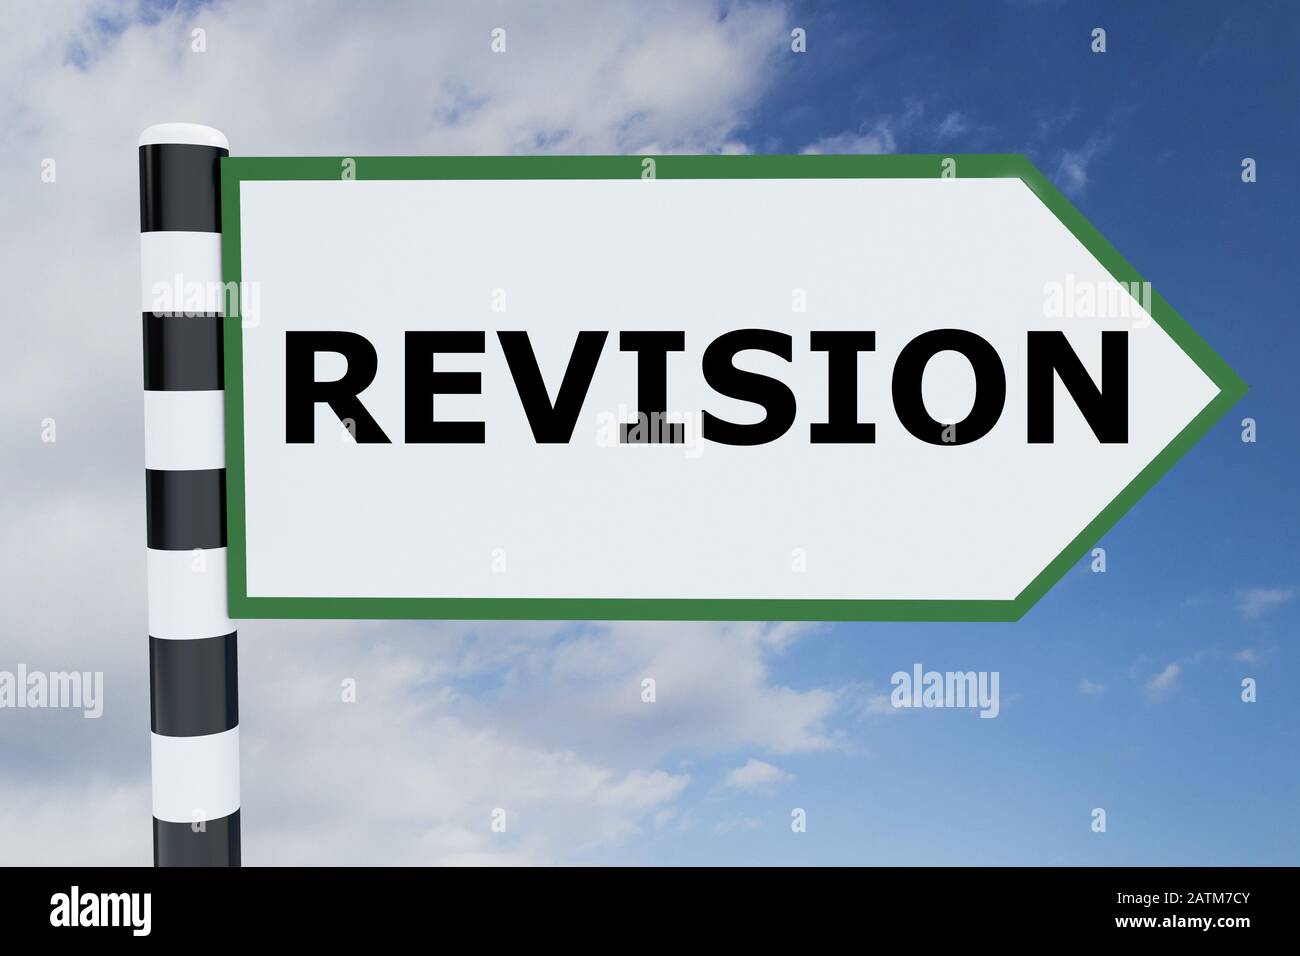 3D illustration of REVISION script on road sign Stock Photo